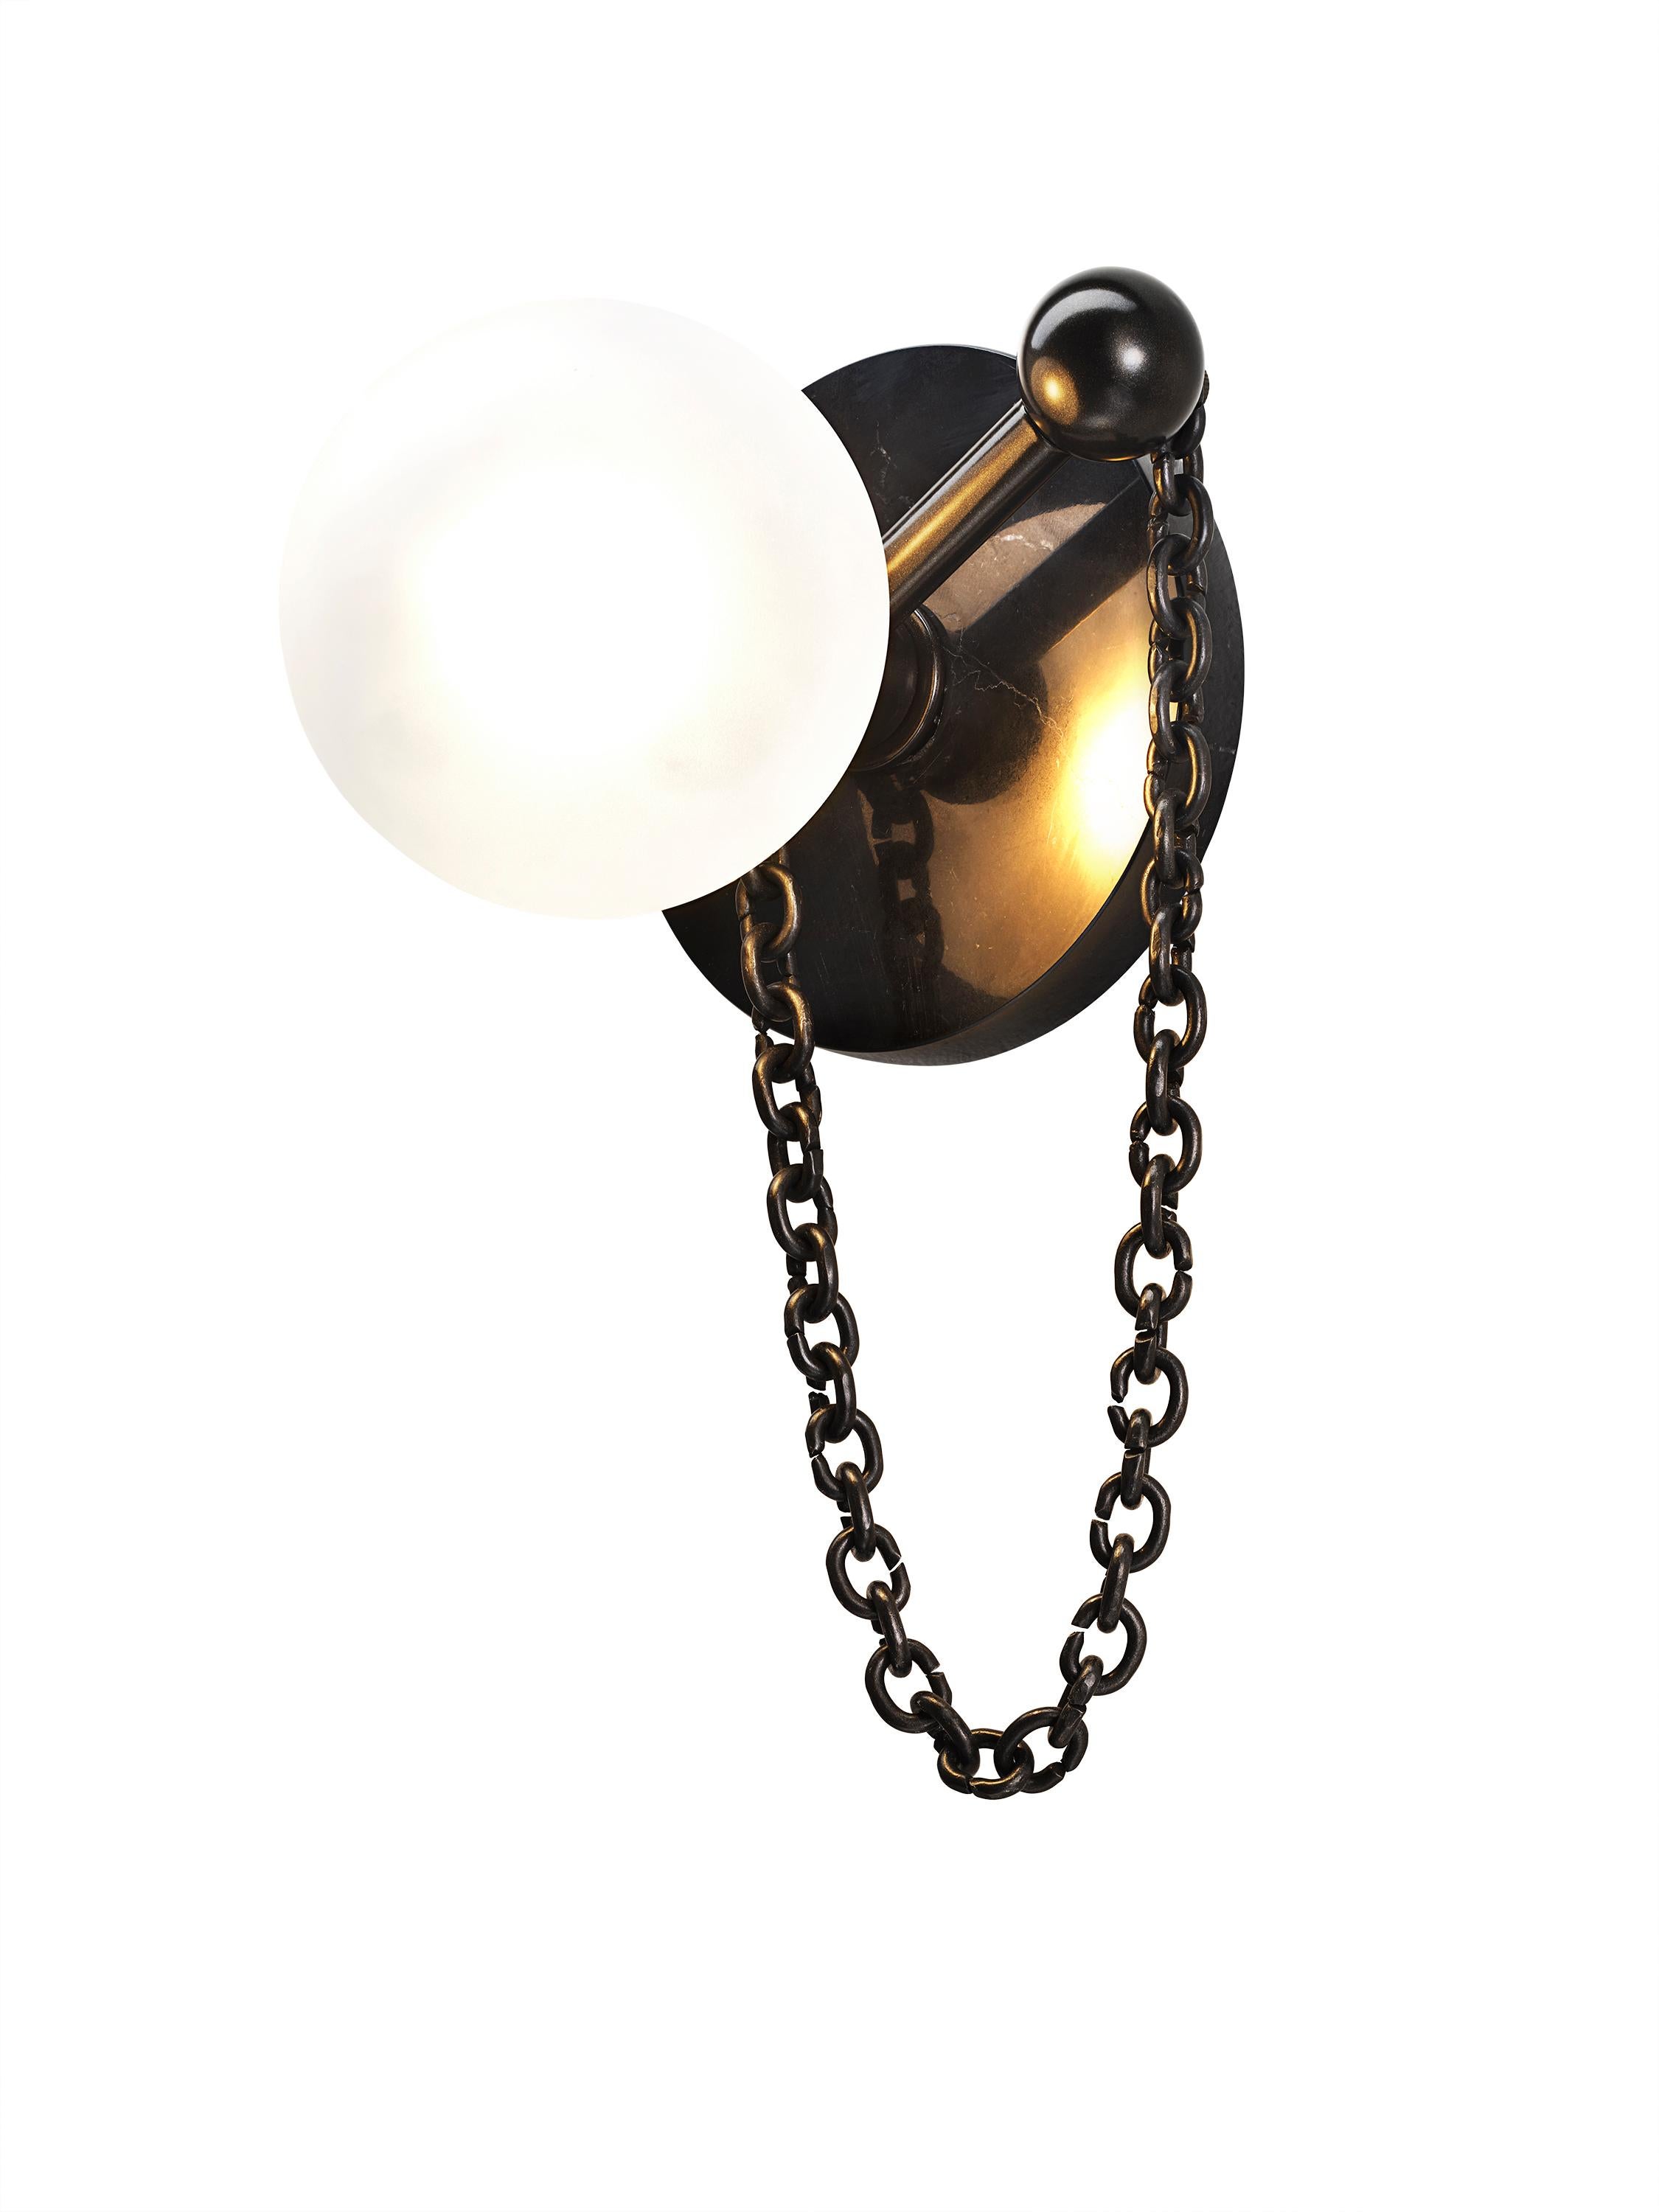 American ALLA Wall Sconce Black Marble & Glass, Emily Del Bello x Blueprint Lighting For Sale